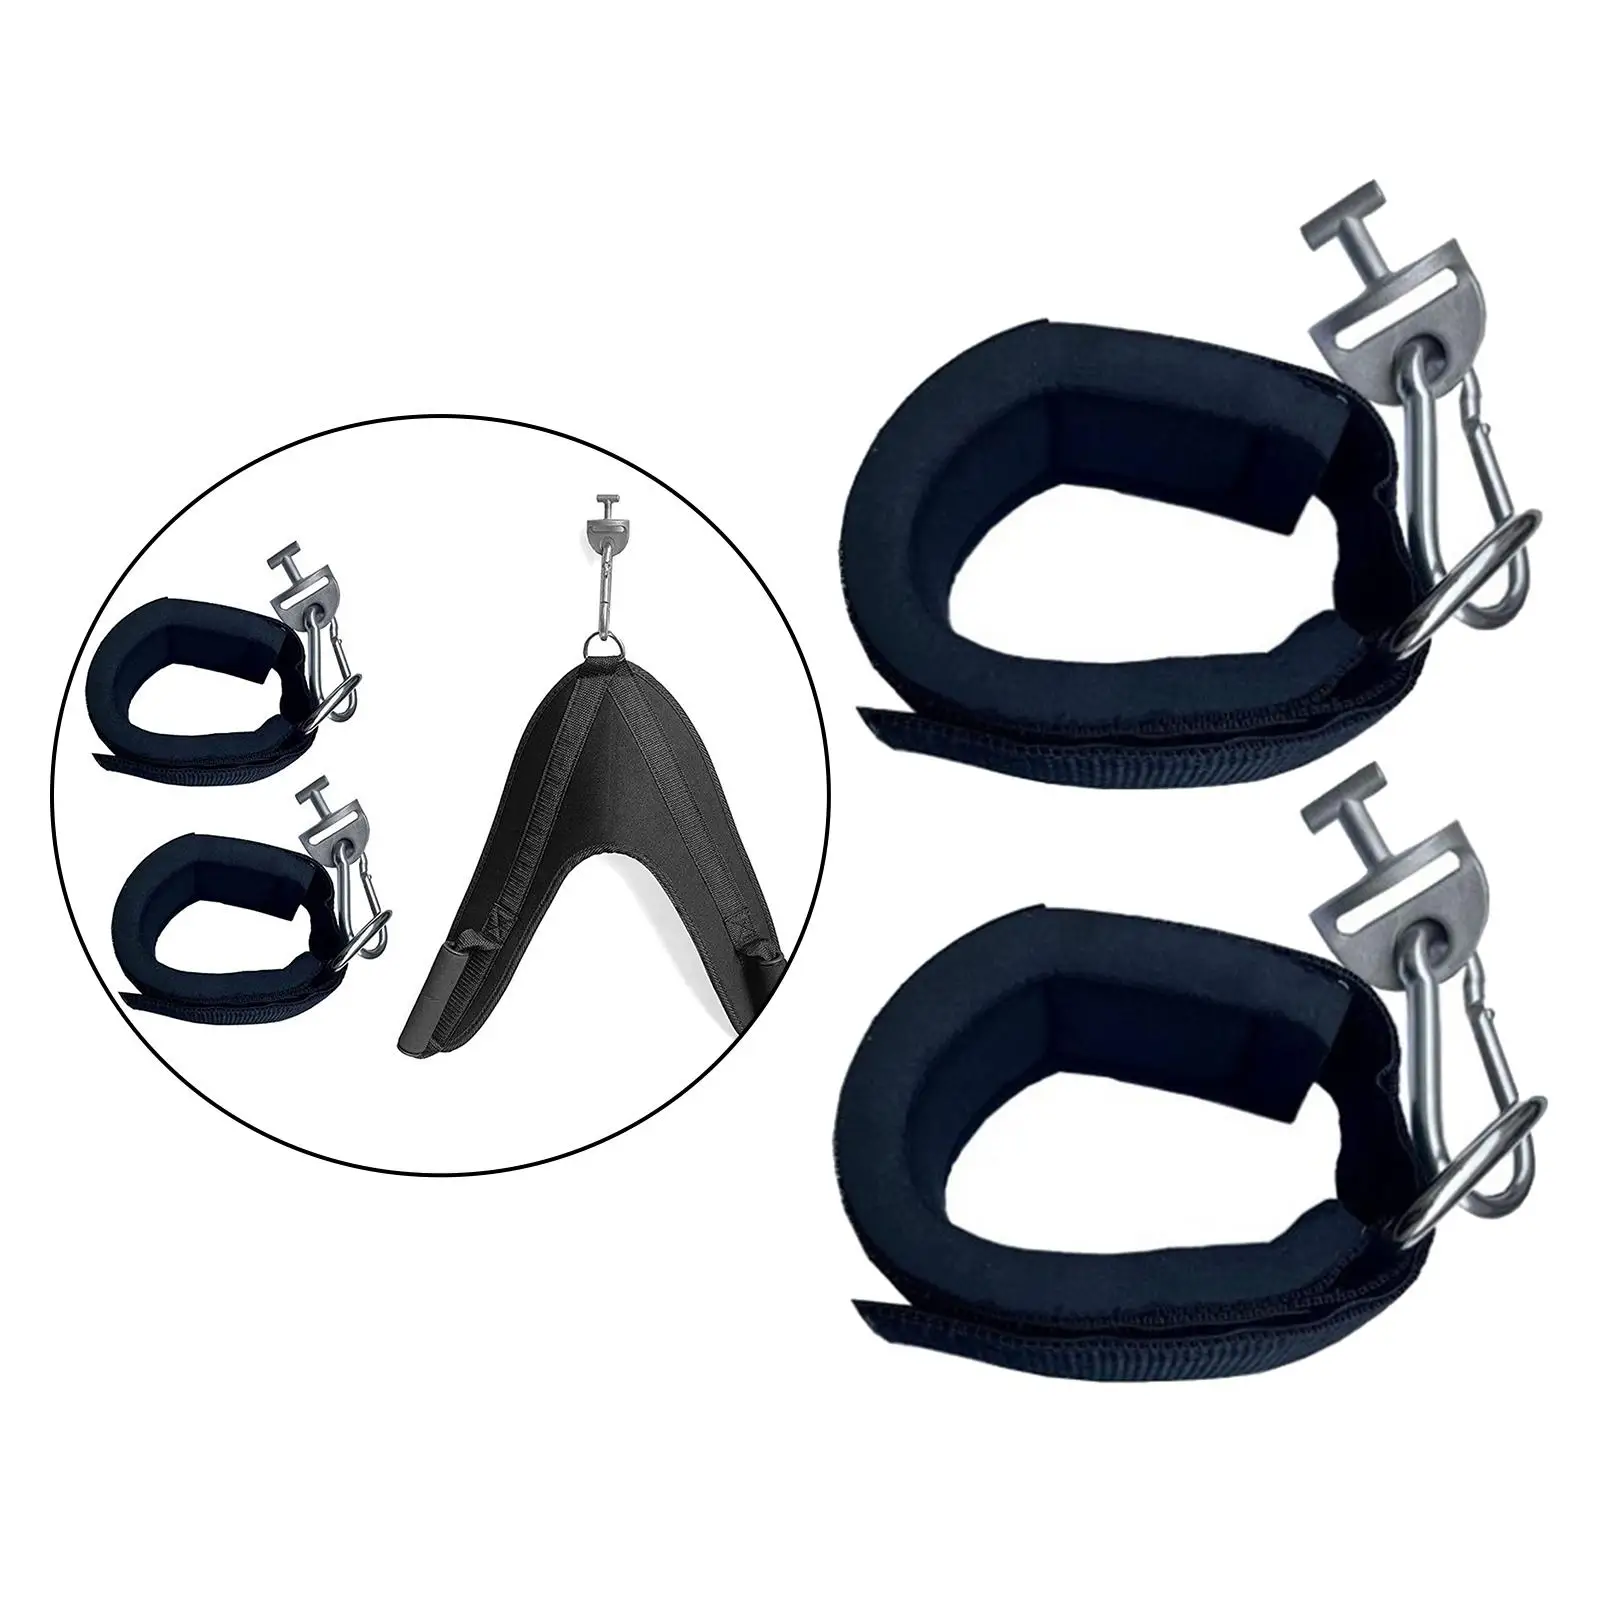 Ankle Straps for Tonal Cable Machine with Tonal Adapters Lower Body Exercises Tonal Attachment for Leg Extensions Hip Abductors